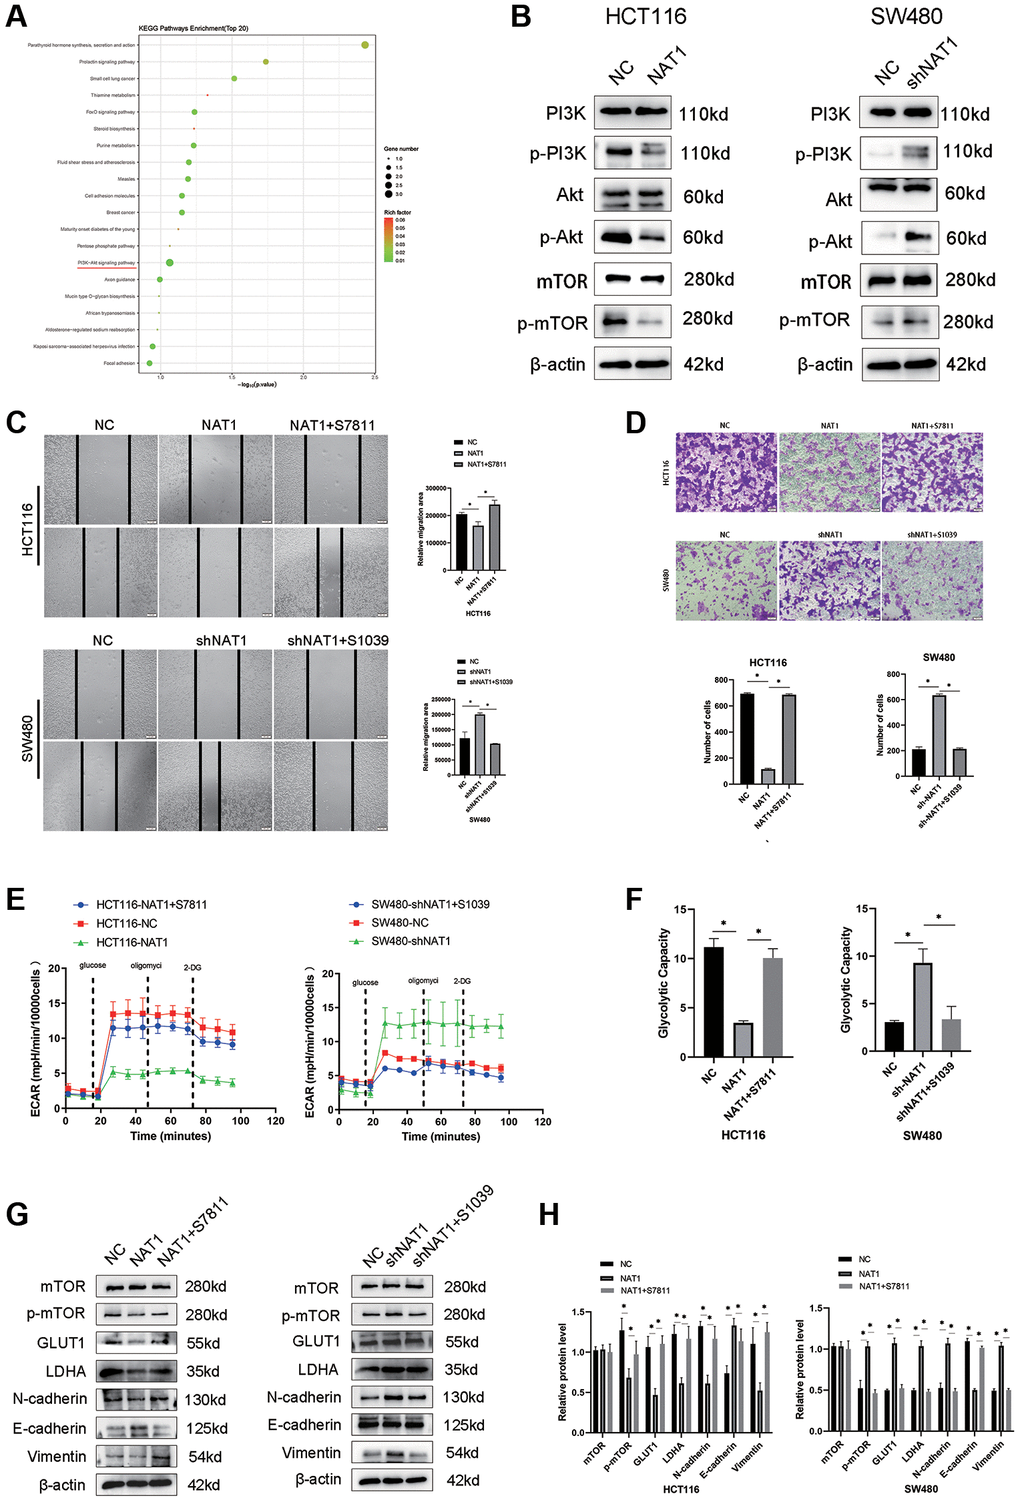 Overexpression of NAT1 blocks PI3K/Akt/mTOR signaling pathway, thereby inhibiting EMT and glycolysis in colorectal cancer cells. (A) Transcriptome sequencing of showed that PI3K/AKt signaling pathway was enriched; (B) Overexpression of NAT1 significantly inhibited the protein expression of PI3K/Akt/mTOR signaling pathway; (C, D) Reactivation of mTOR can reduce the migration and invasion ability of colorectal cancer cells; (E, F) Reactivation of mTOR mitigated the inhibition of glycolysis by overexpression of NAT1; (G, H) Activation of PI3K/Akt/mTOR signaling pathway reversed the inhibitory effect of NAT1 overexpression on EMT (N-cadherin, Vimentin) and glycolytic (GLUT1, LDHA) related proteins.